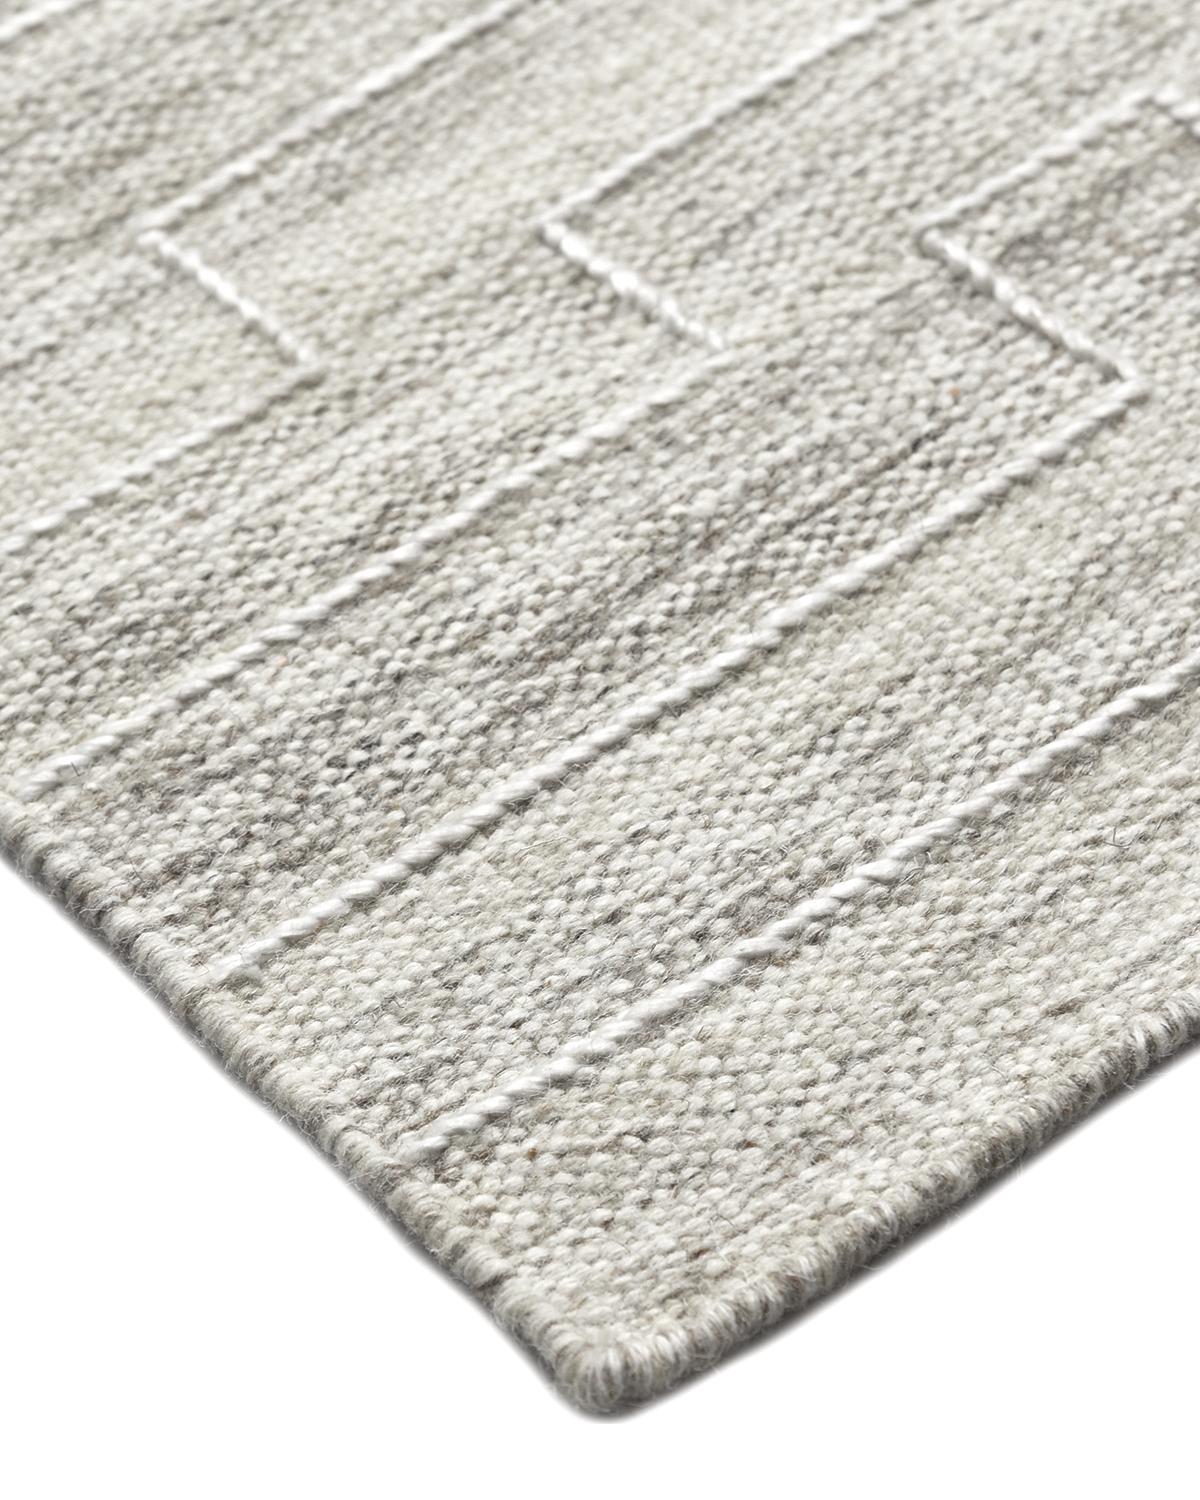 Durable and low-maintenance, flatweave rugs are especially popular for high-traffic rooms and in households with children and pets. The handwoven rugs in the Flatweave collection are beautiful as well as practical. Their quiet patterns and